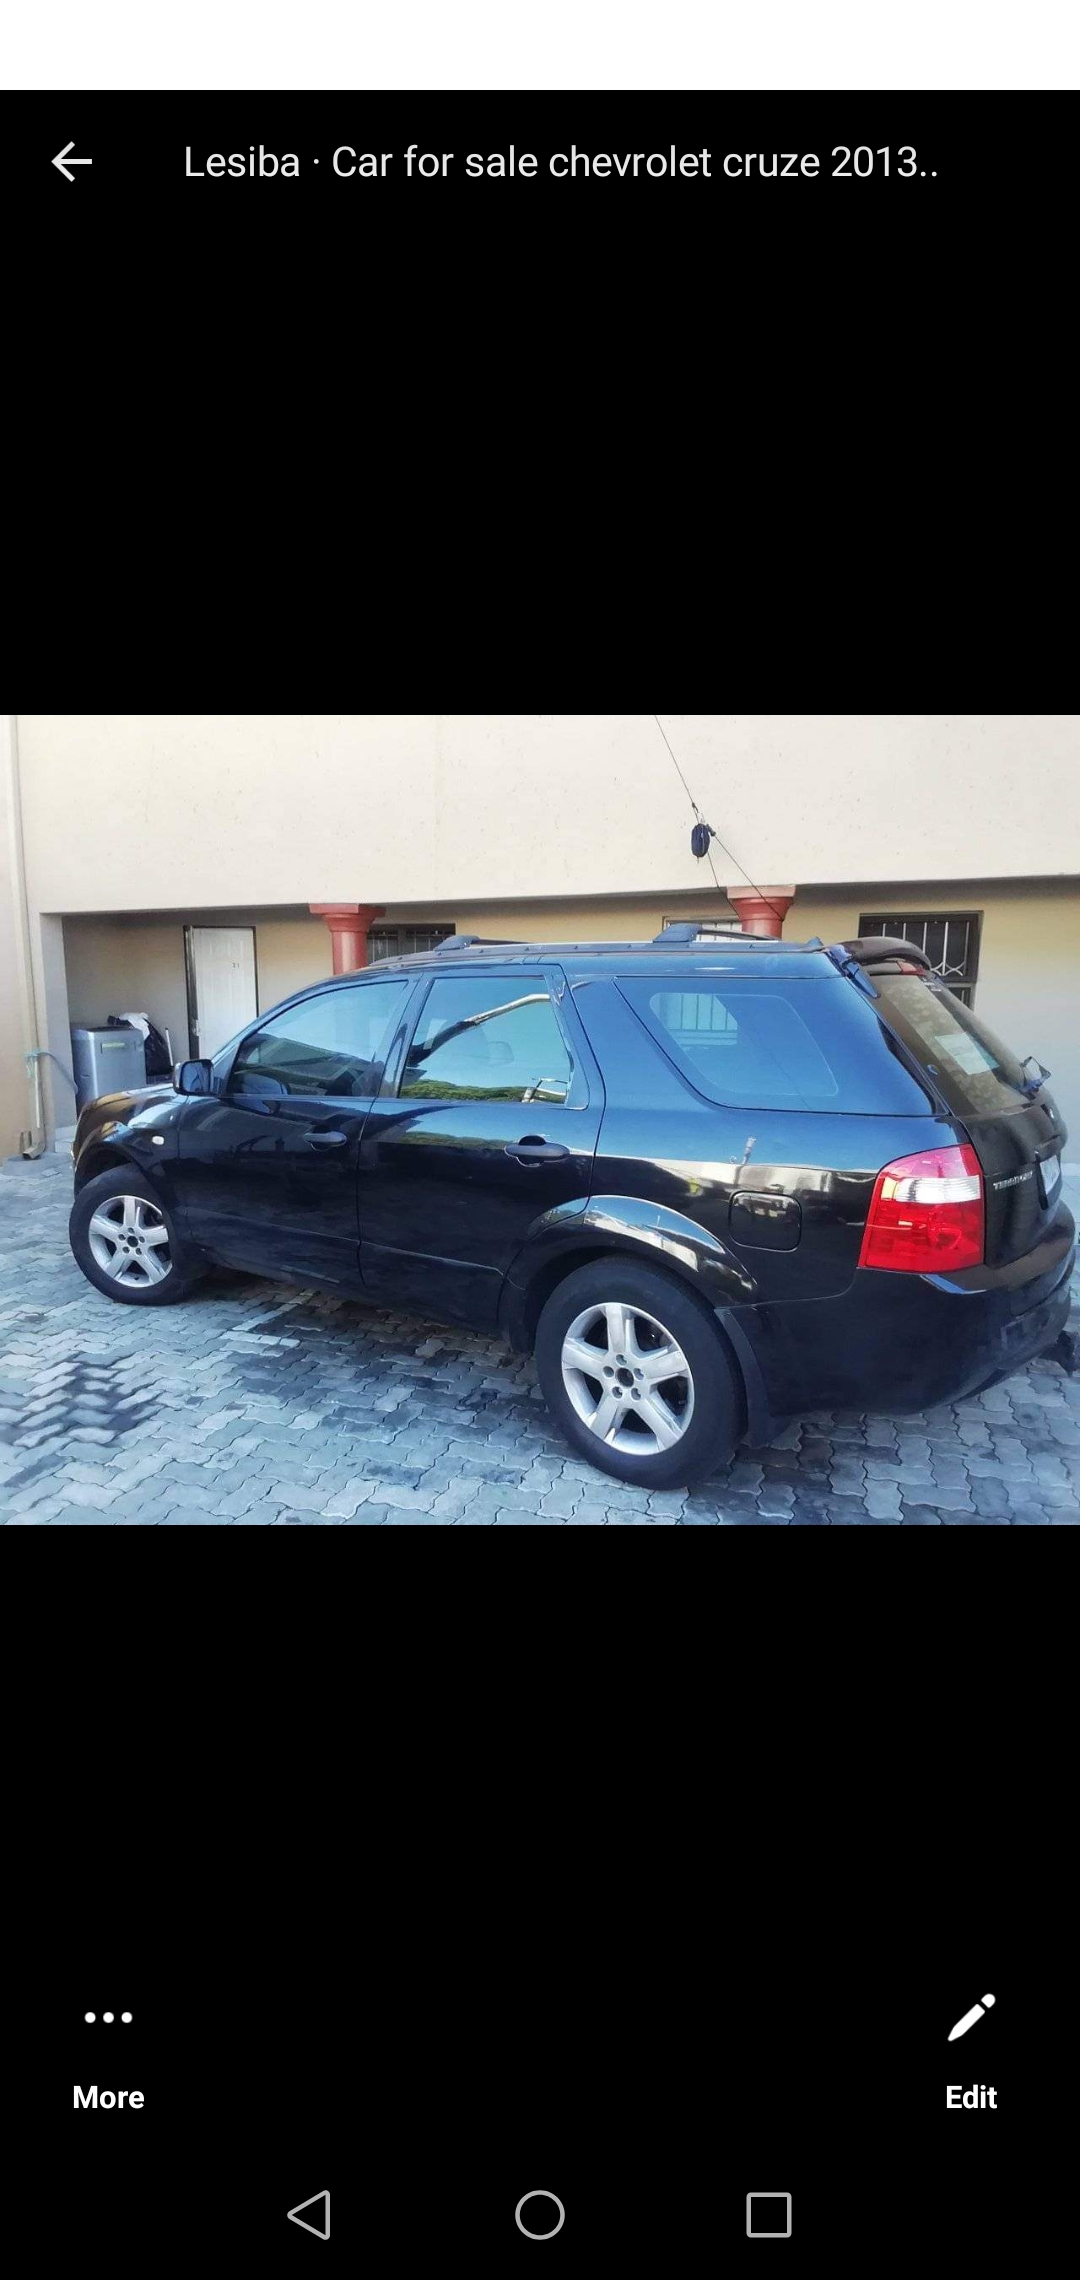 Ford territory 2006 